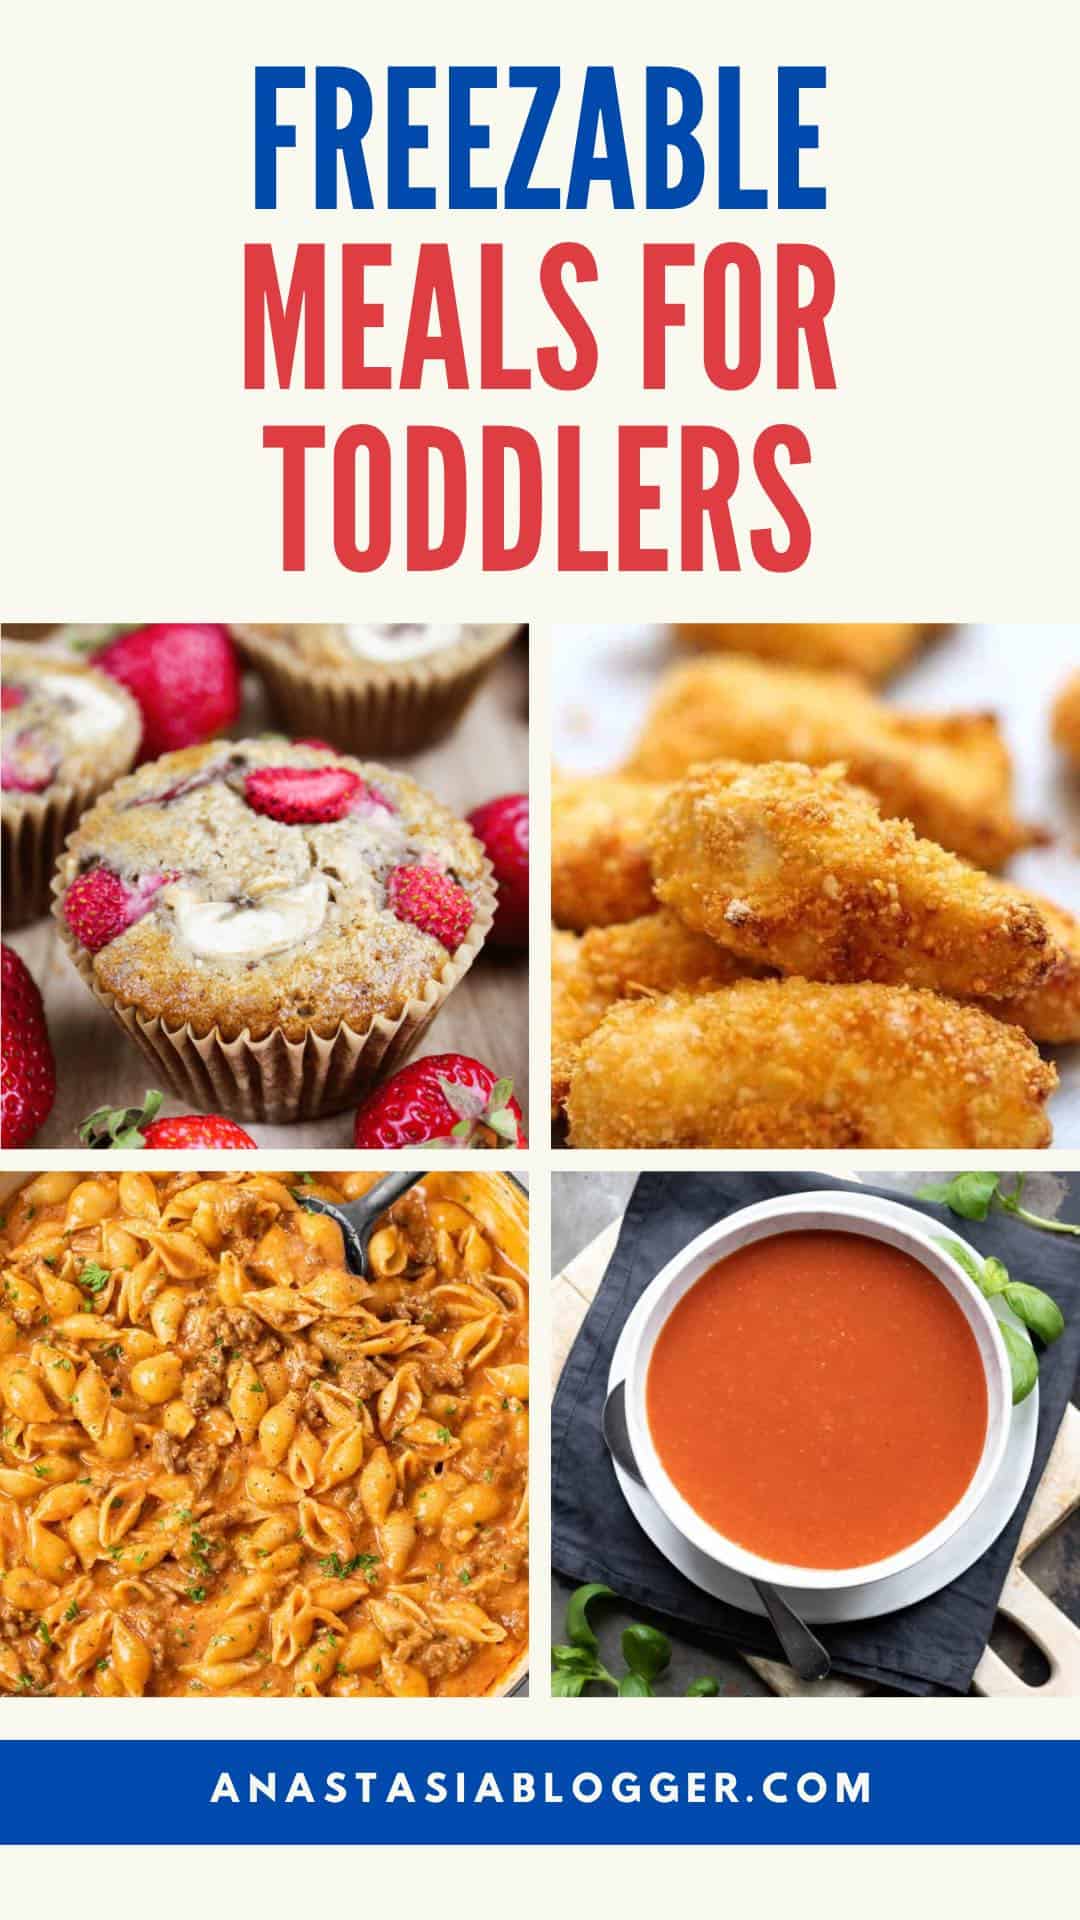 5 Easy Toddler Meals You Can Prep Ahead